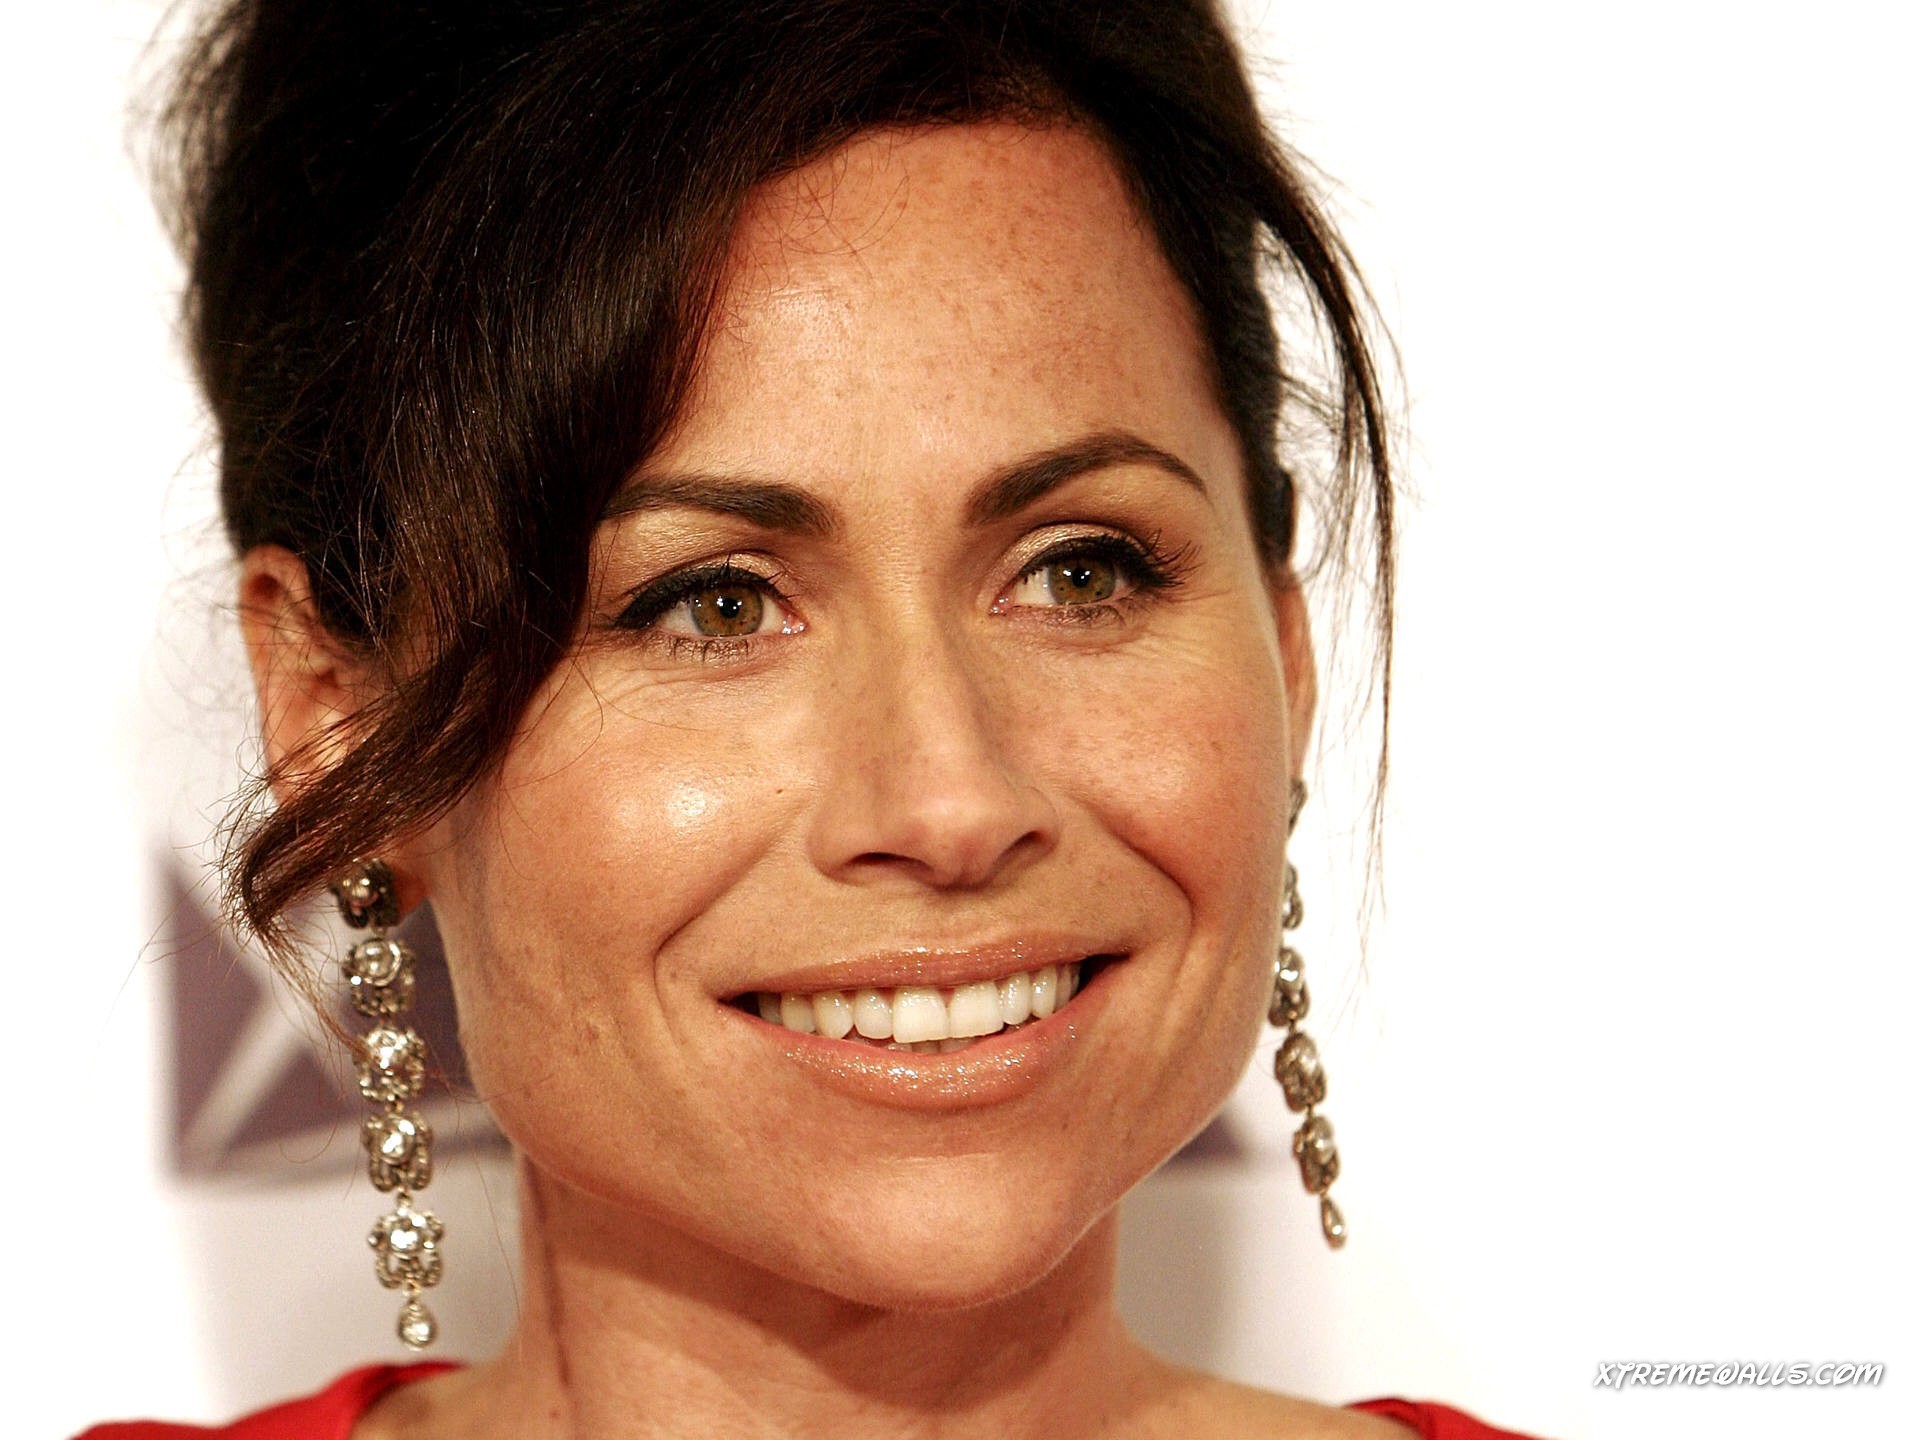 Minnie Driver Wallpapers Images Photos Pictures Backgrounds.